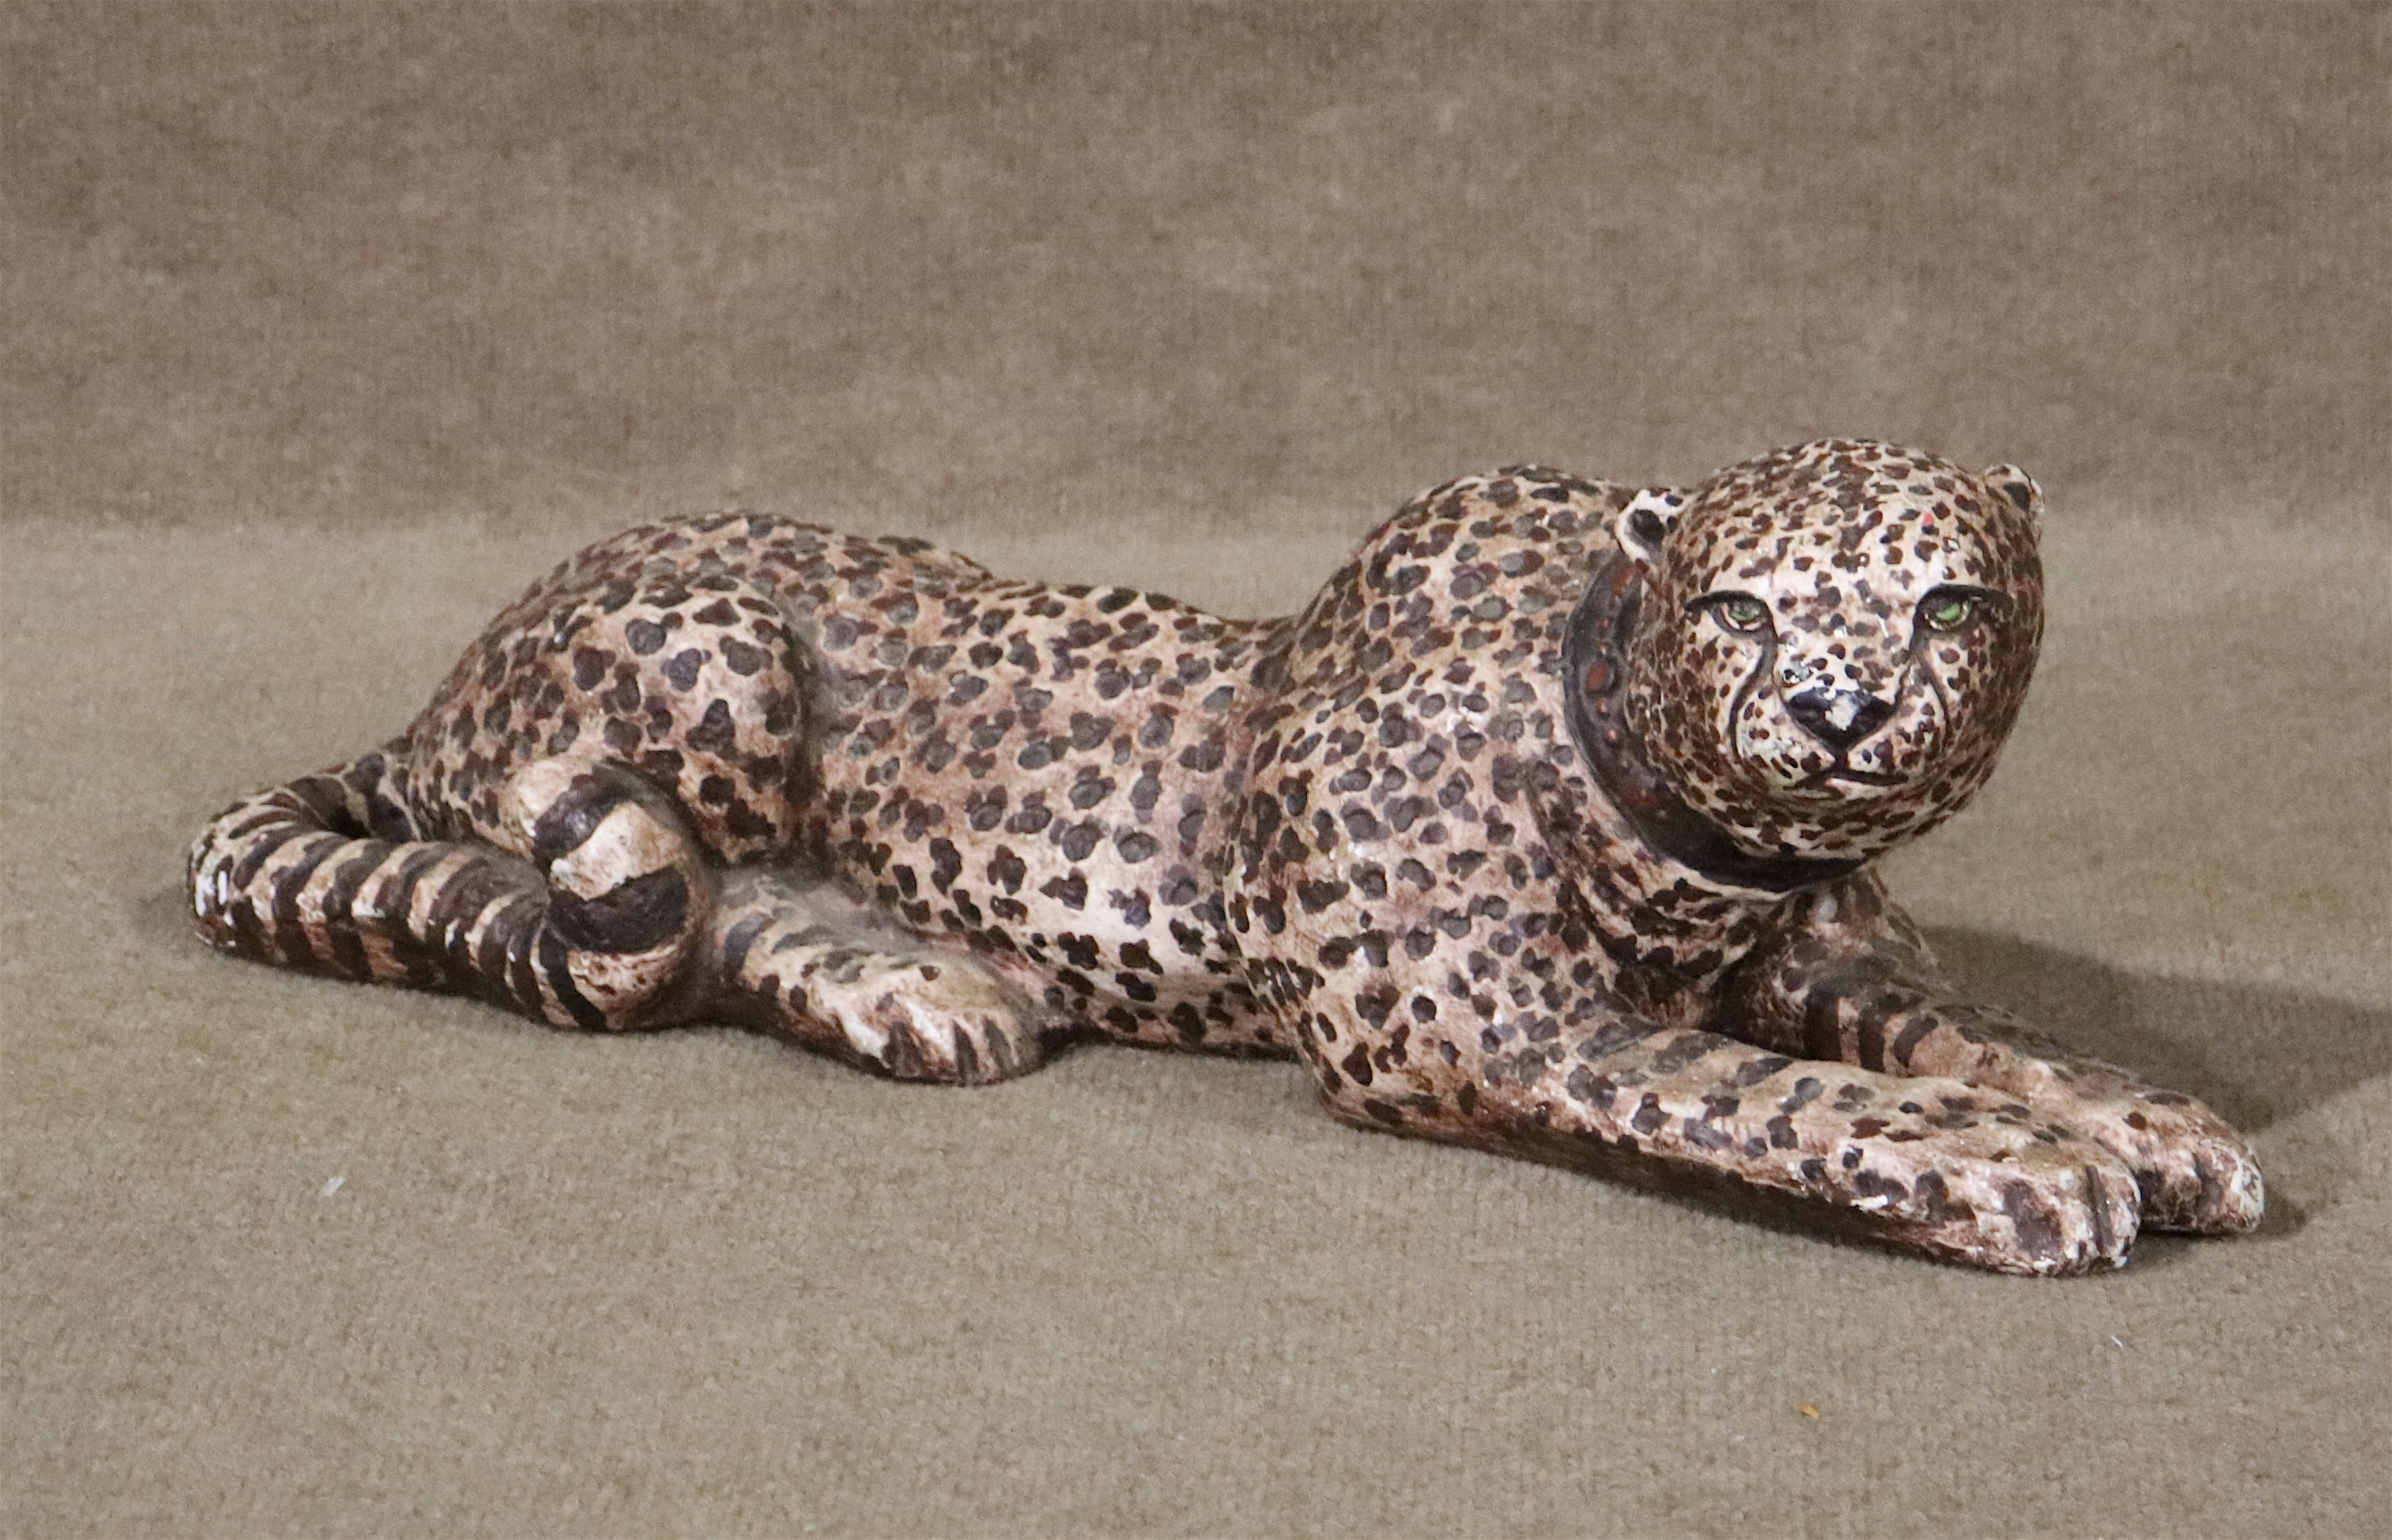 Beautiful handmade leopard sculpture with painted spots.
Please confirm location NY or NJ